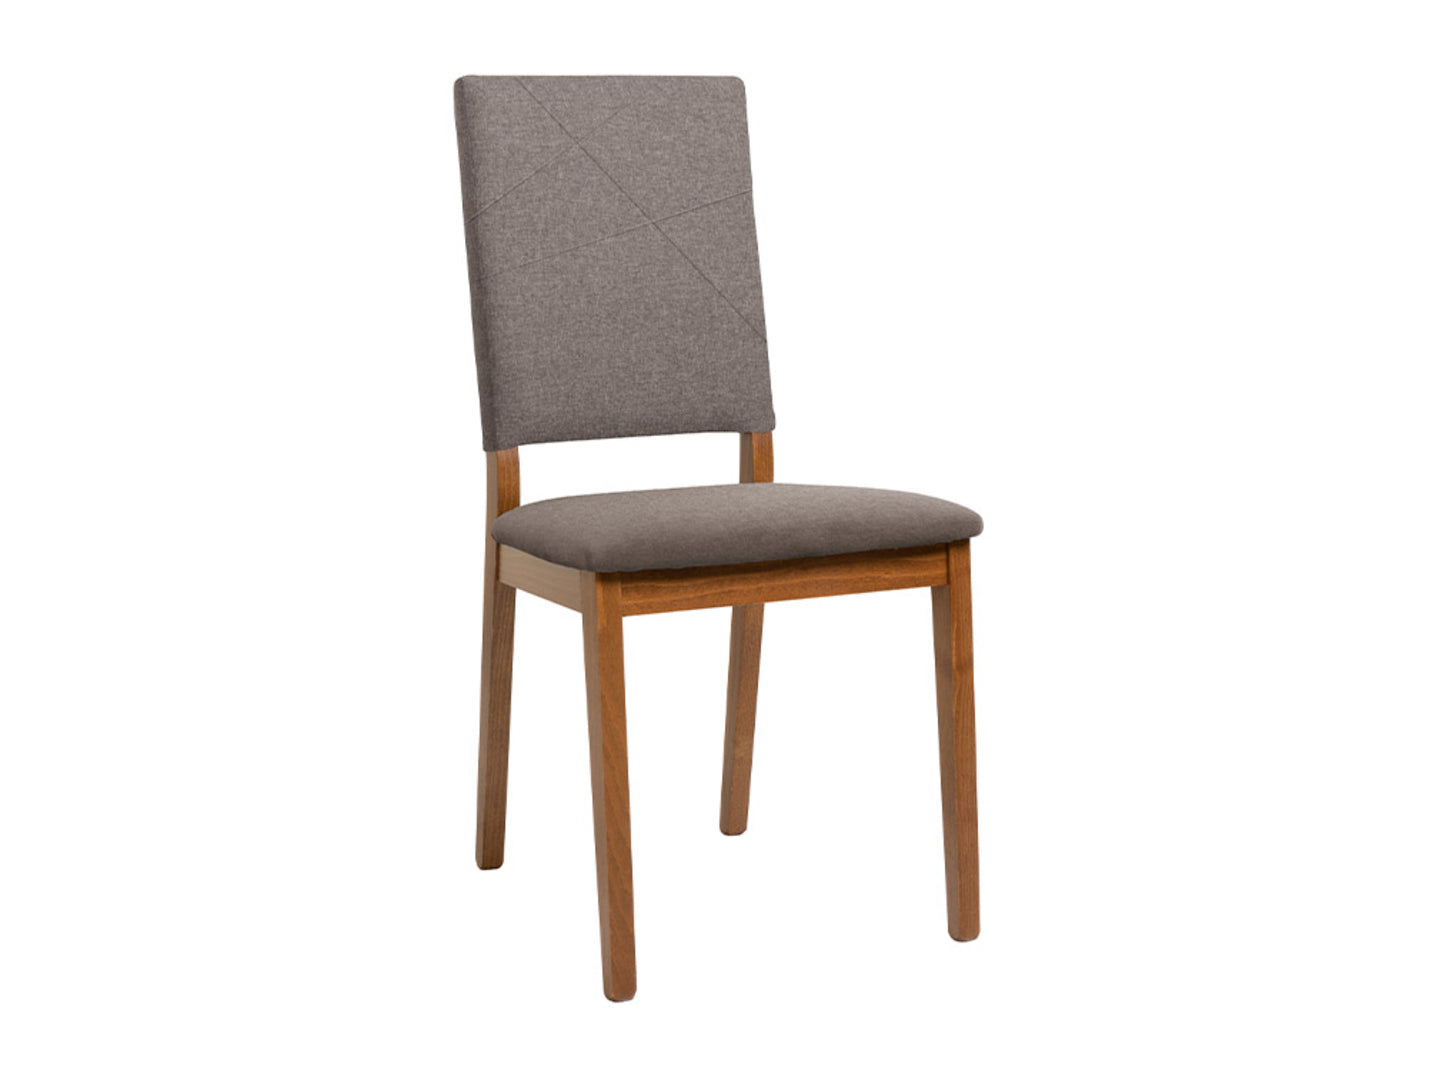 FORN CHAIR